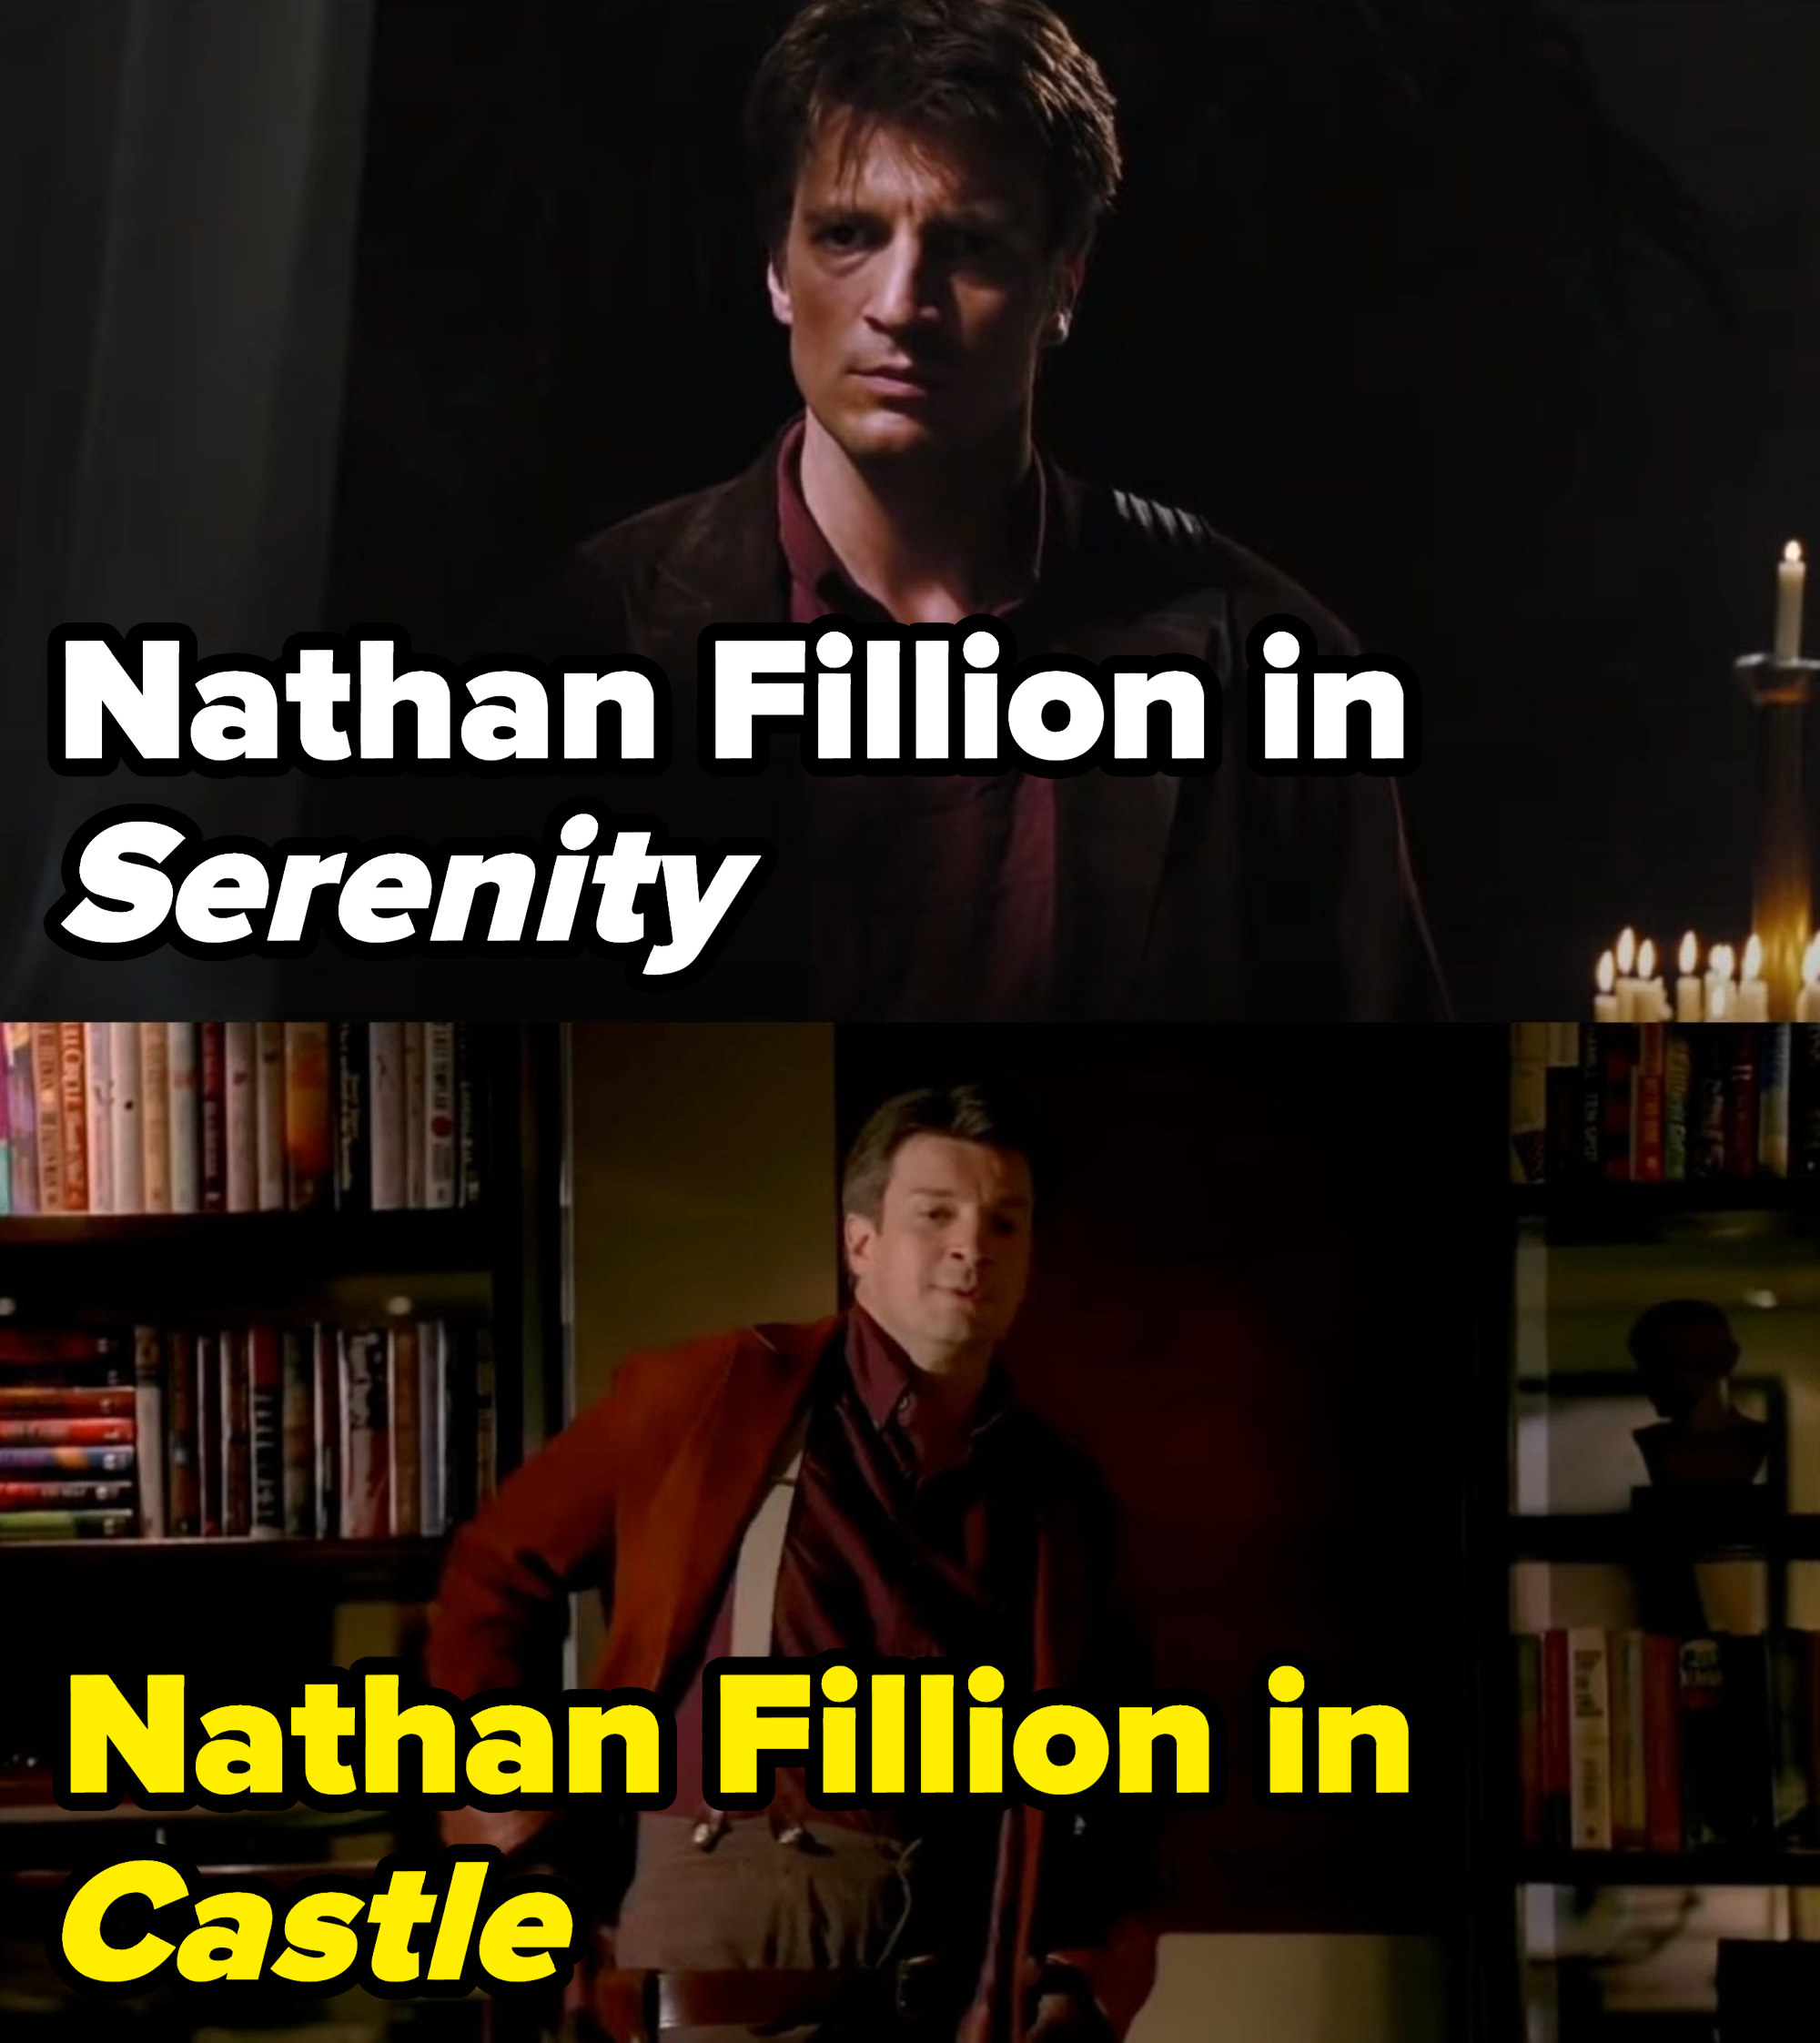 nathan fillion in serenity and castle